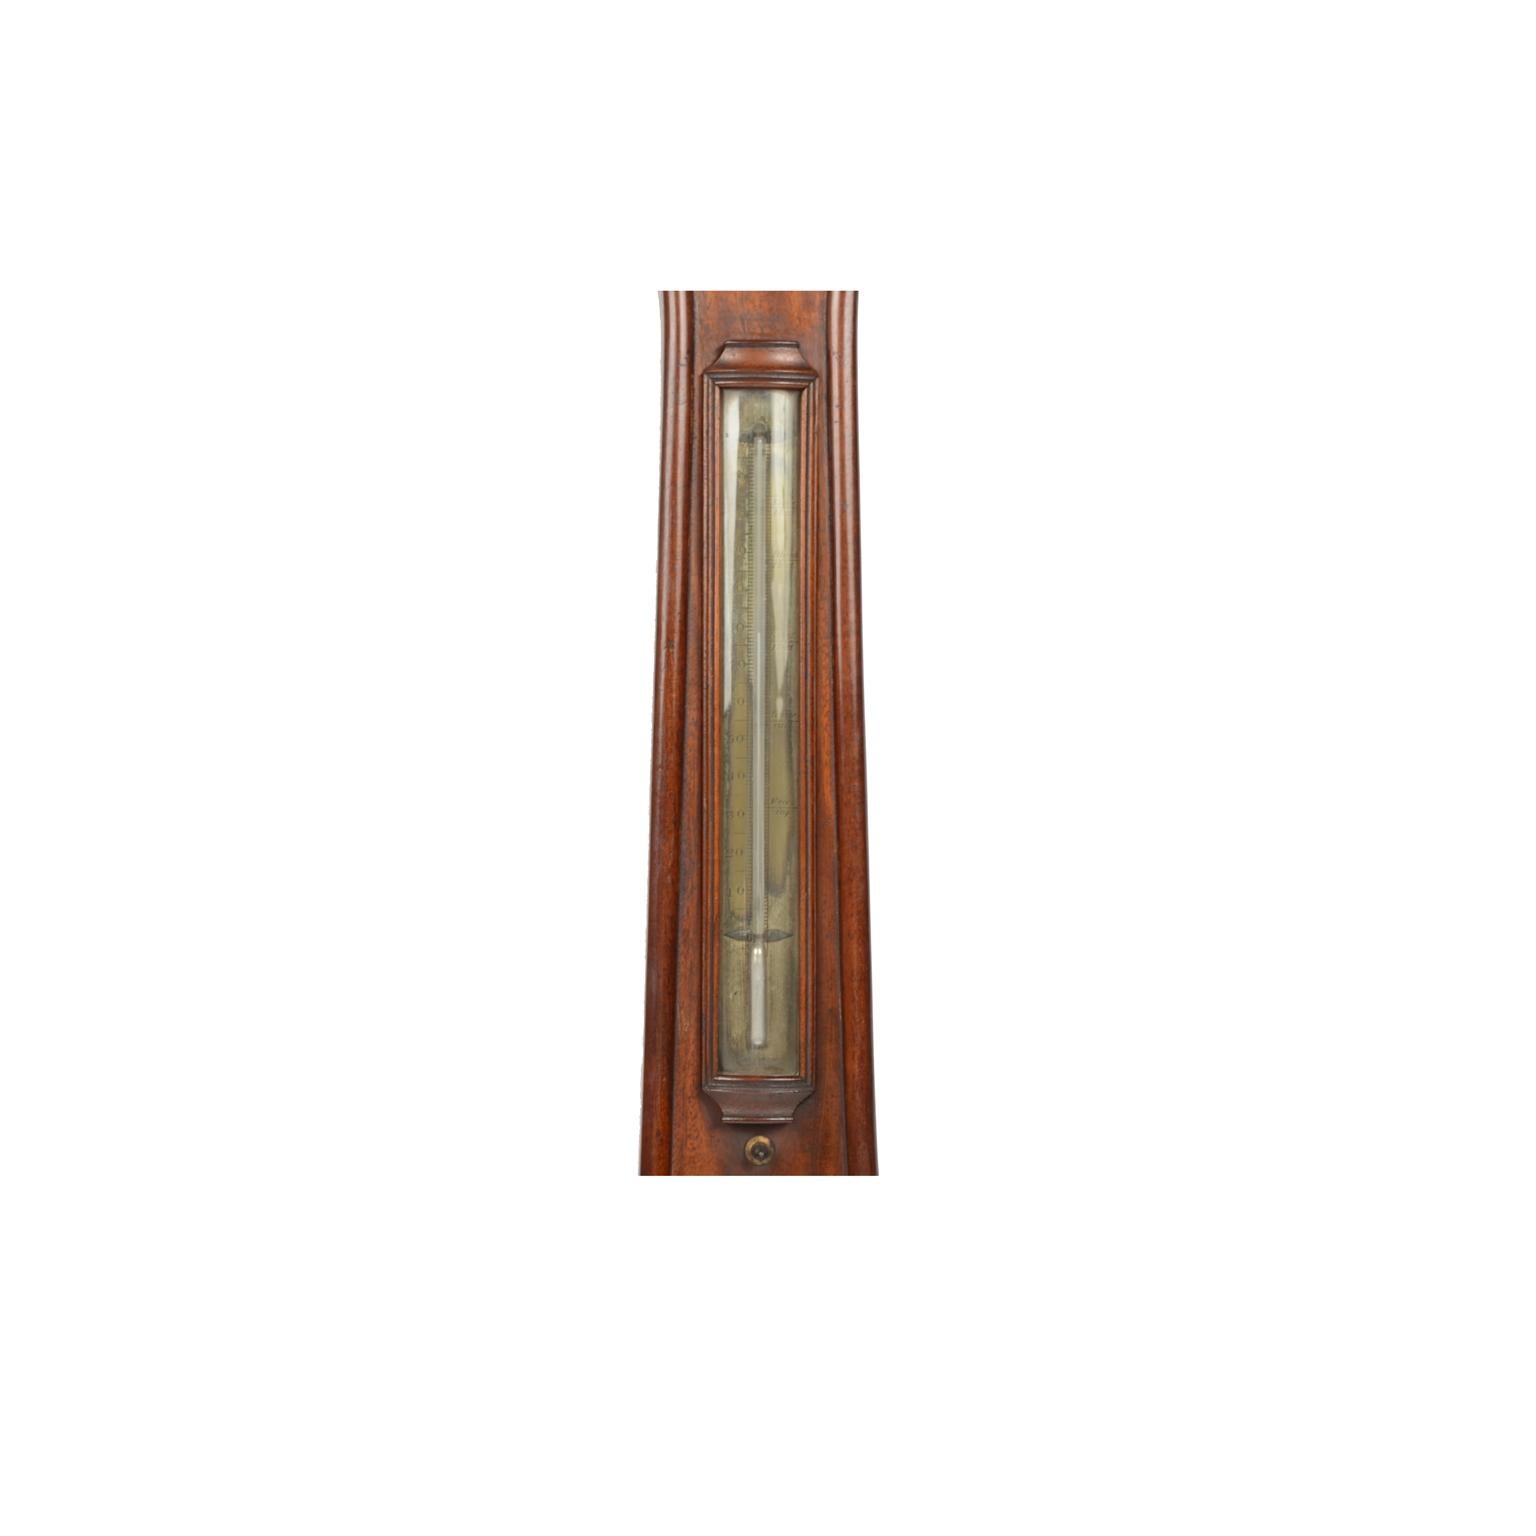 Mid-19th Century English Barometer Mounted on a Wooden Plank Elegantly Carved